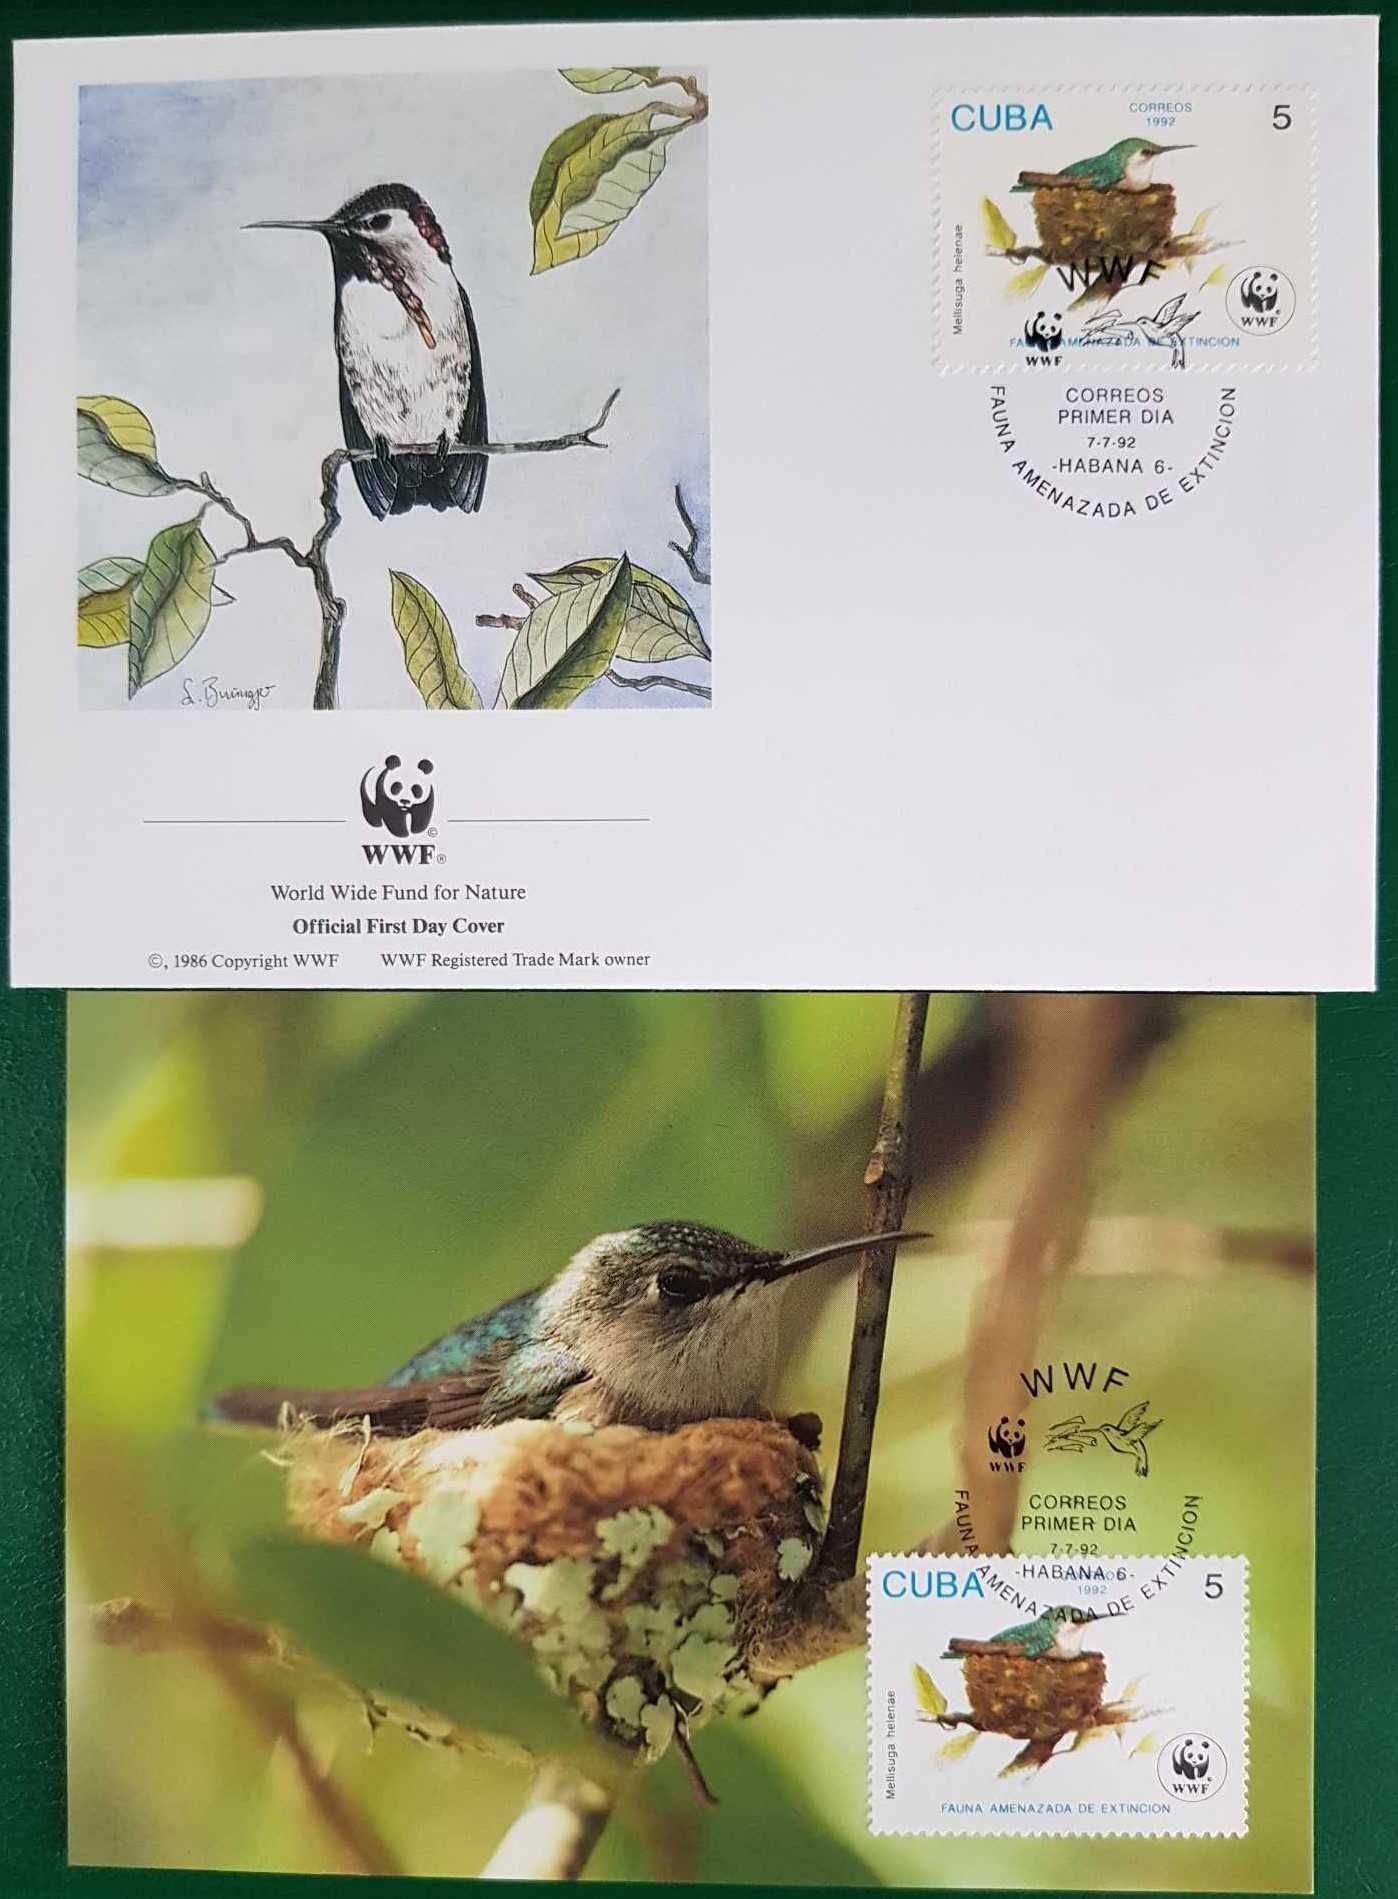 WWF-Maxime si FDC set complet